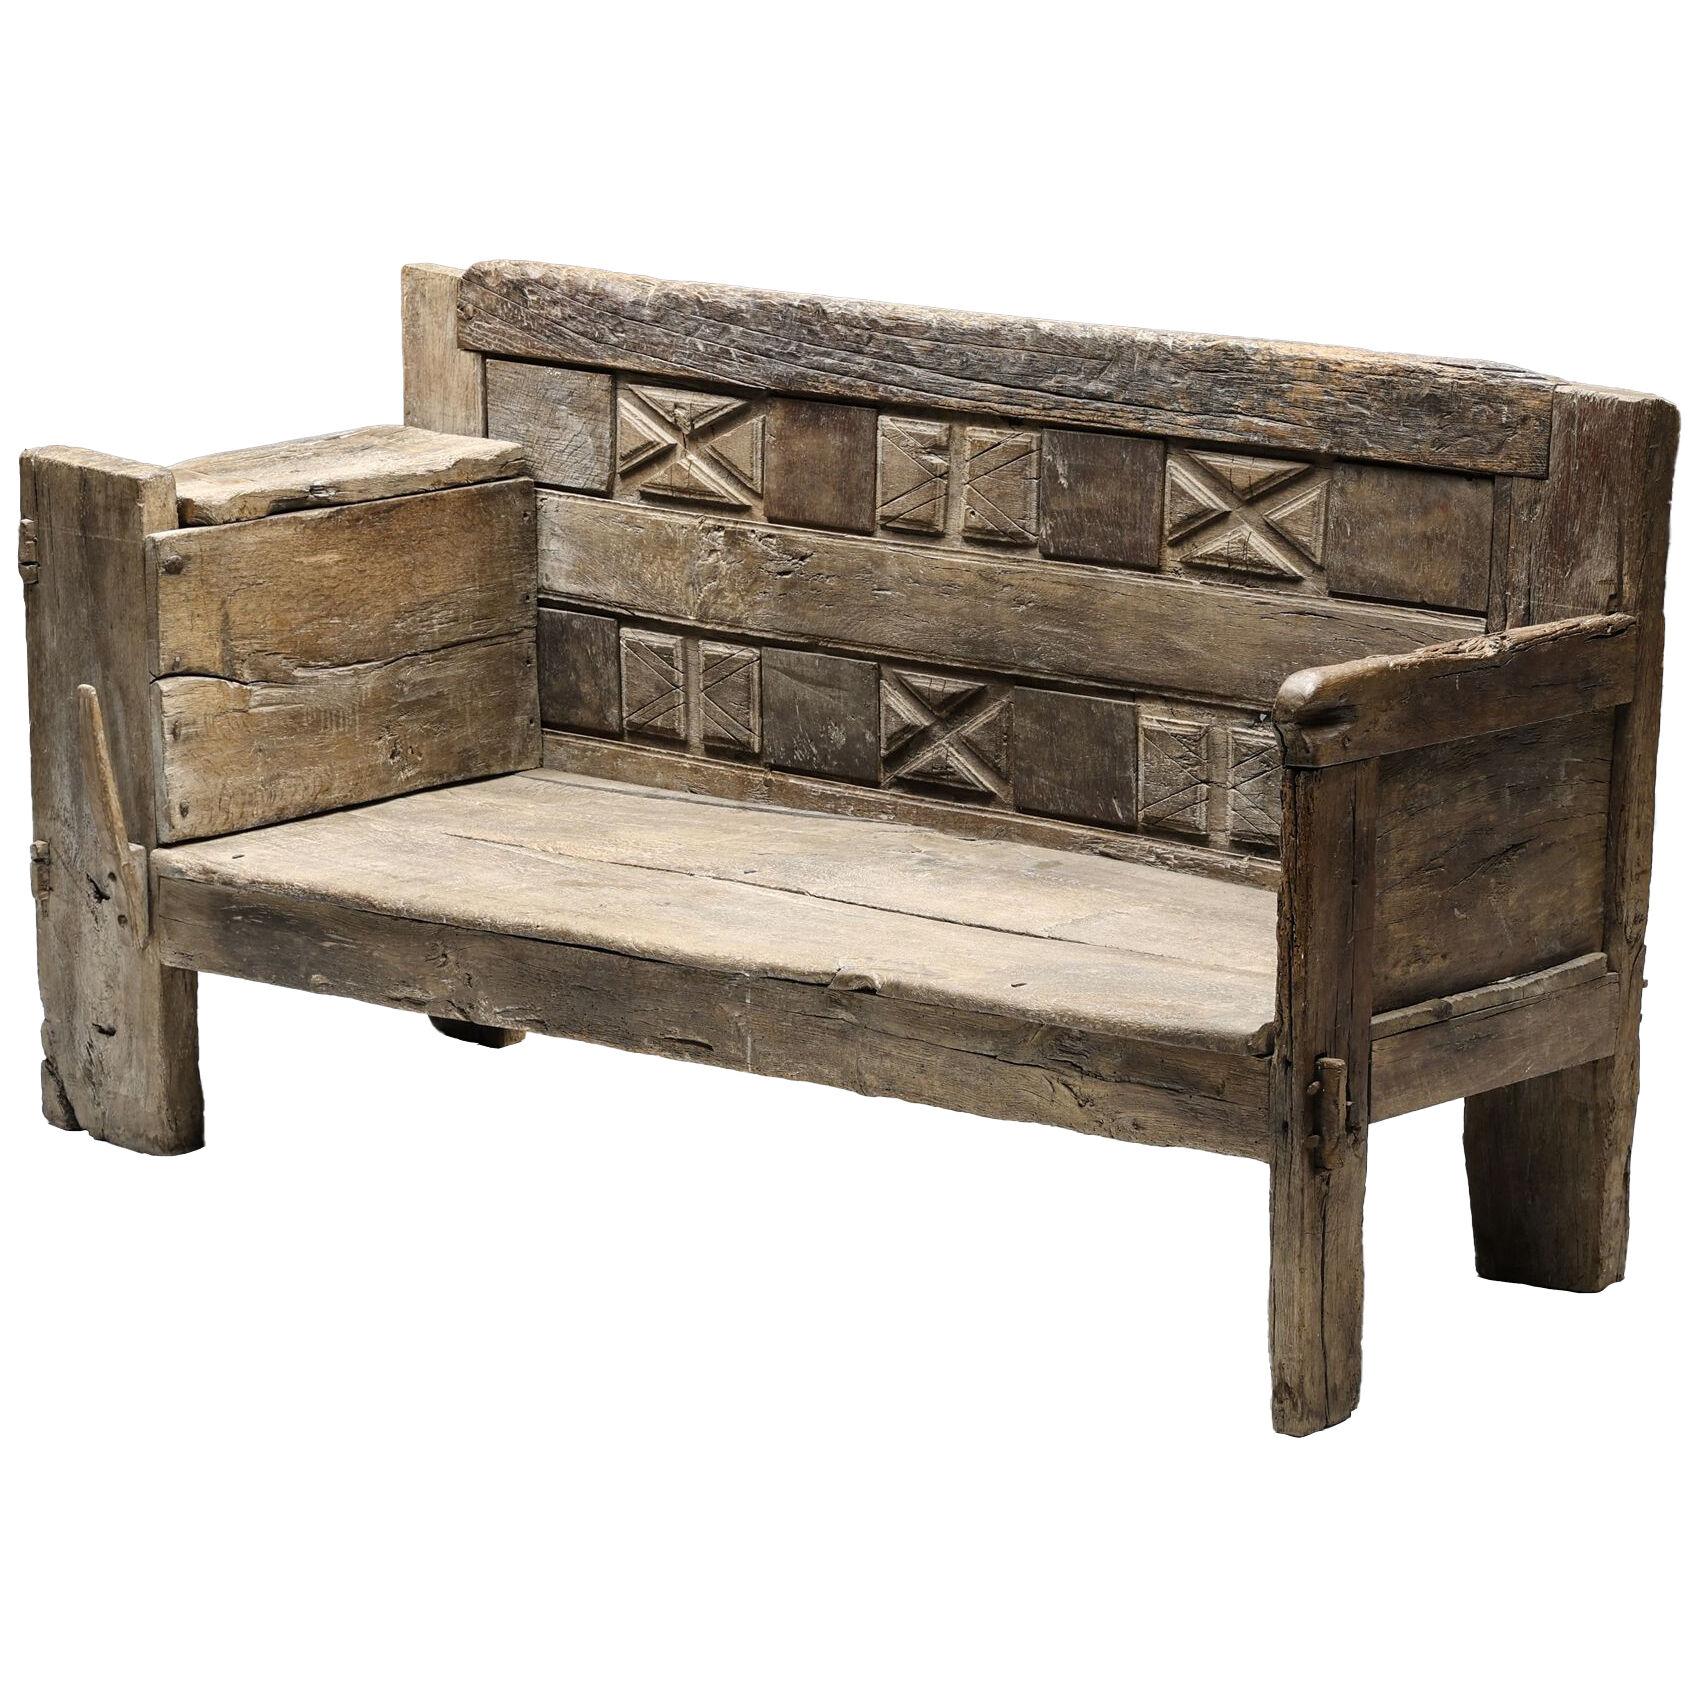 Rustic Graphical Bench with Arm Rests - 1800's